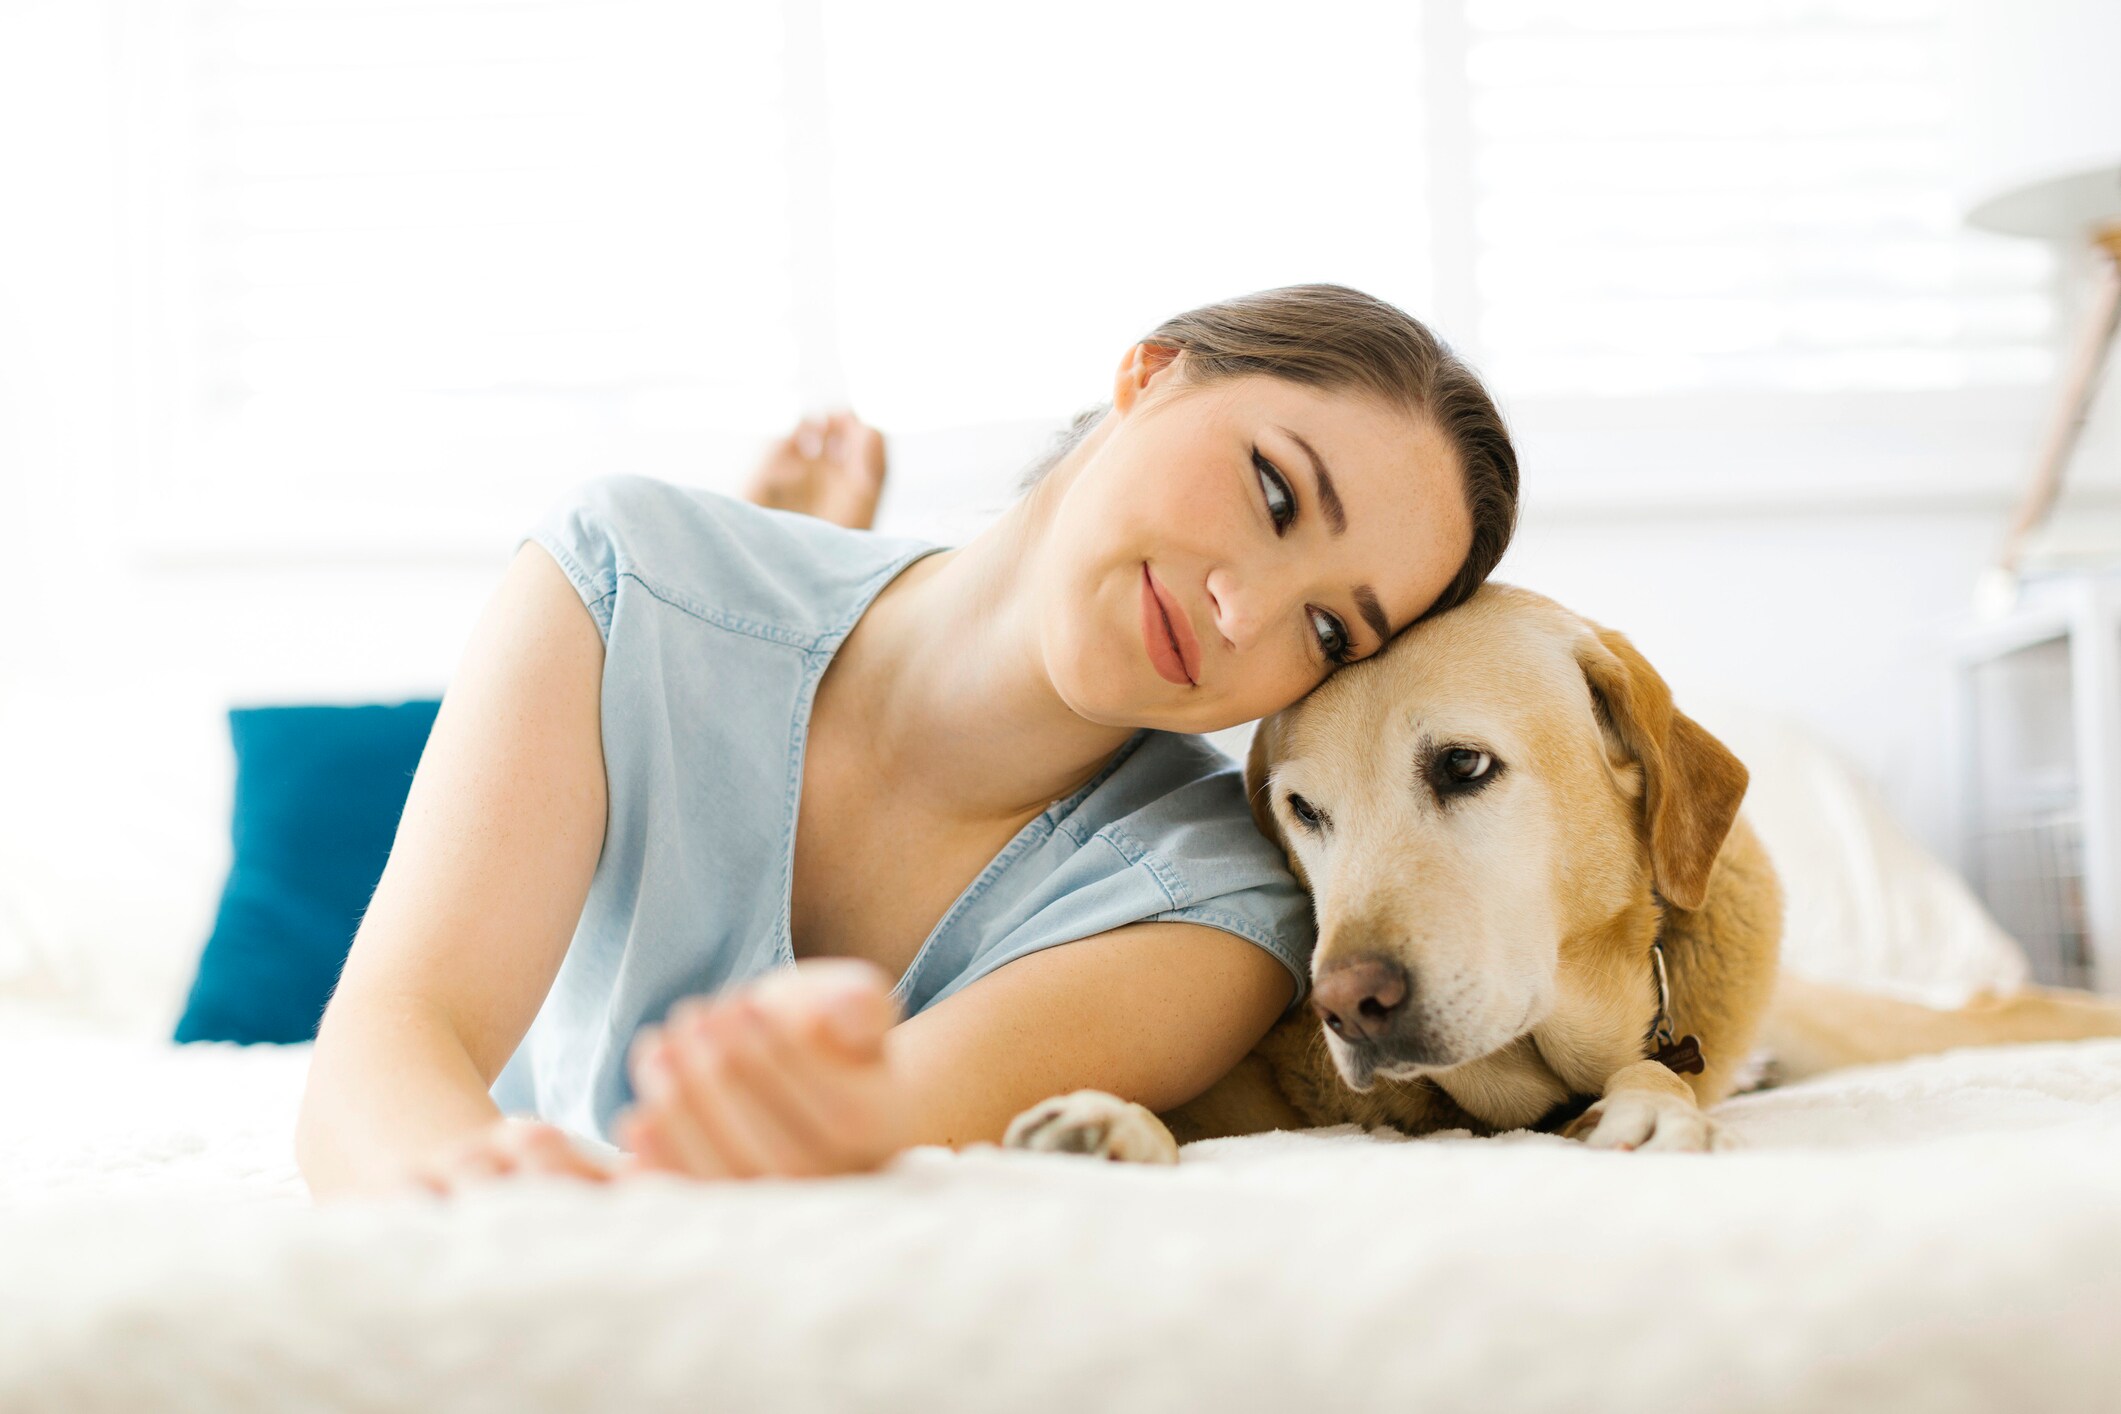 Pet sitting insurance: Benefits, policies and costs